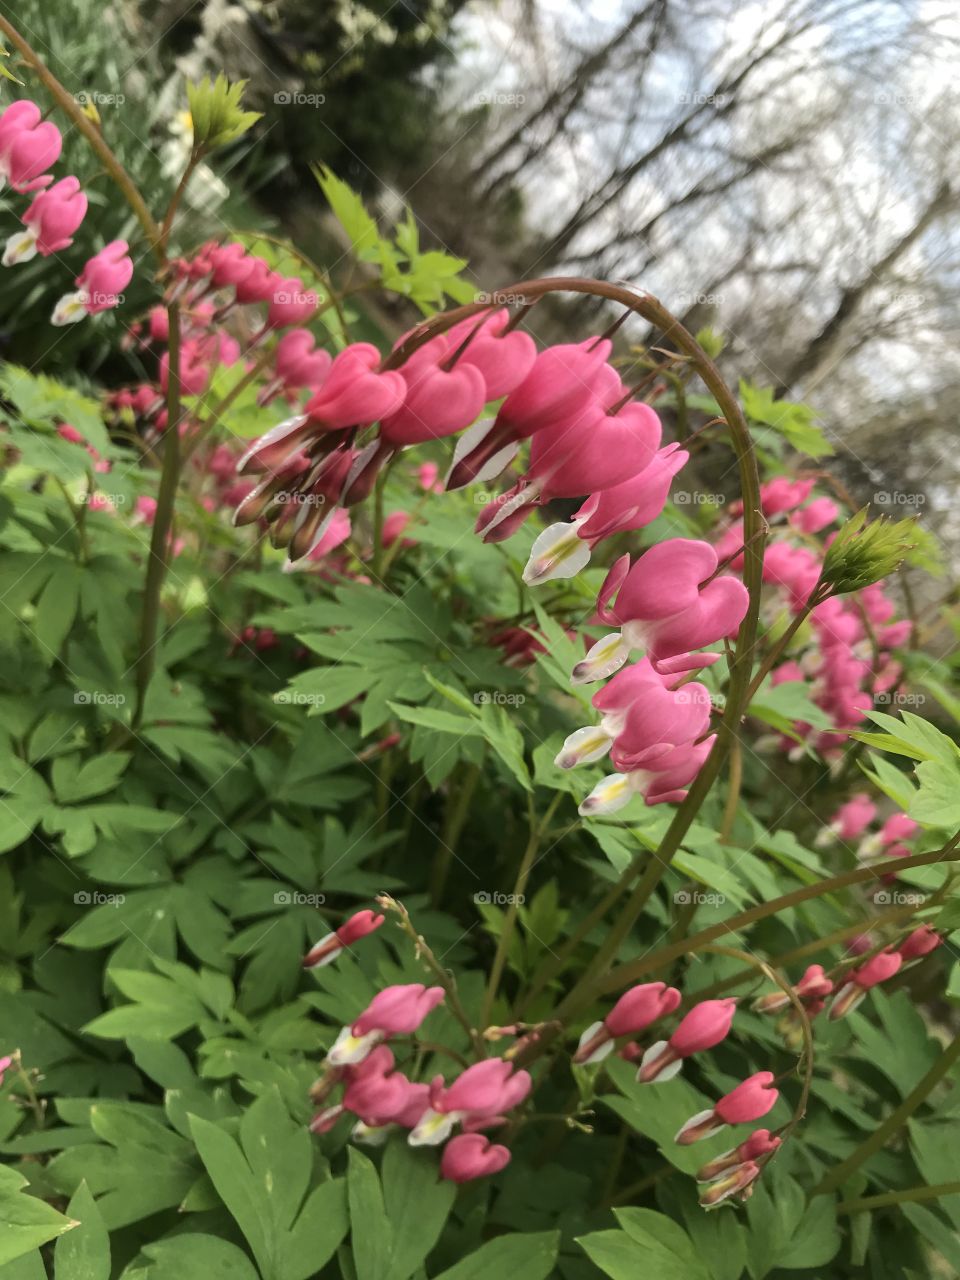 Bleeding hearts that bloomed in my backyard. Only lasted a week with the bloom but so pretty !!! 